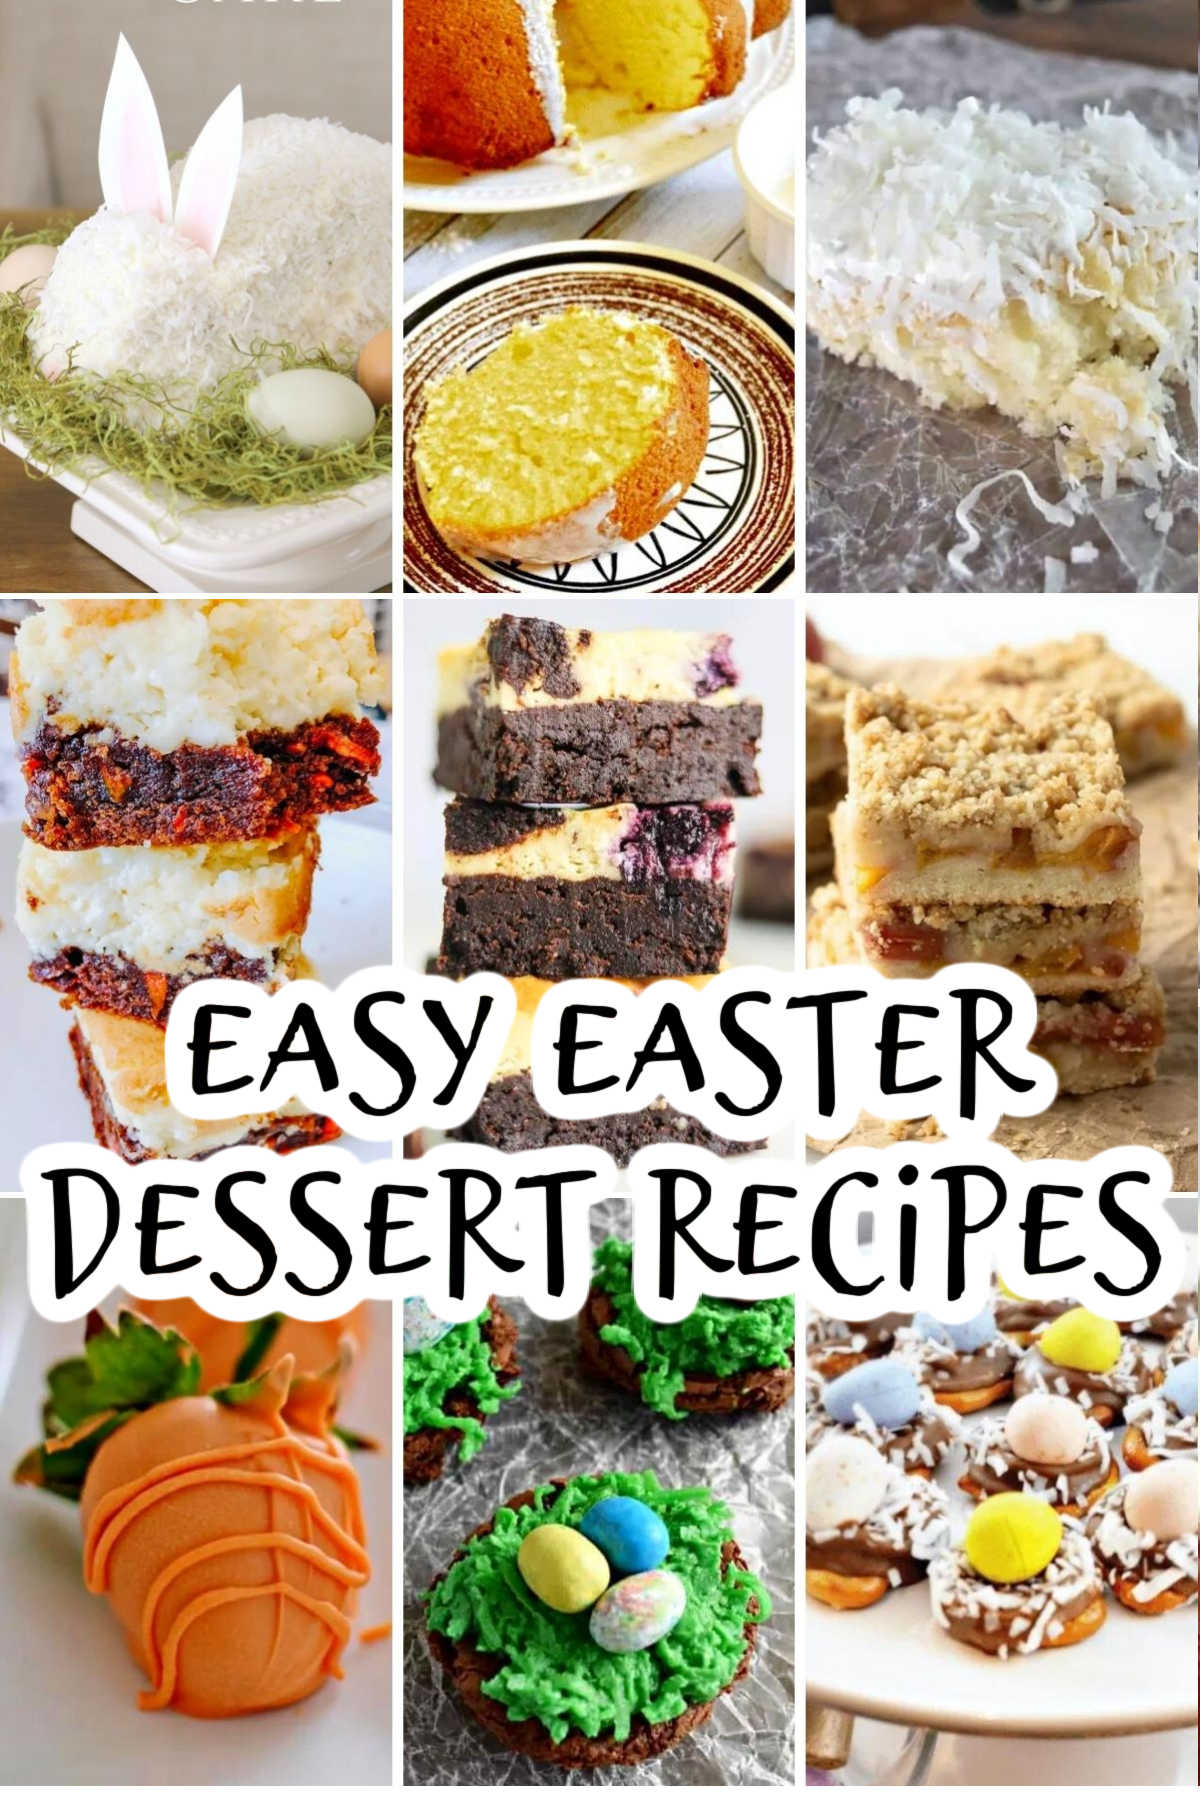 Easy Easter Desserts Recipes | Today's Creative Ideas